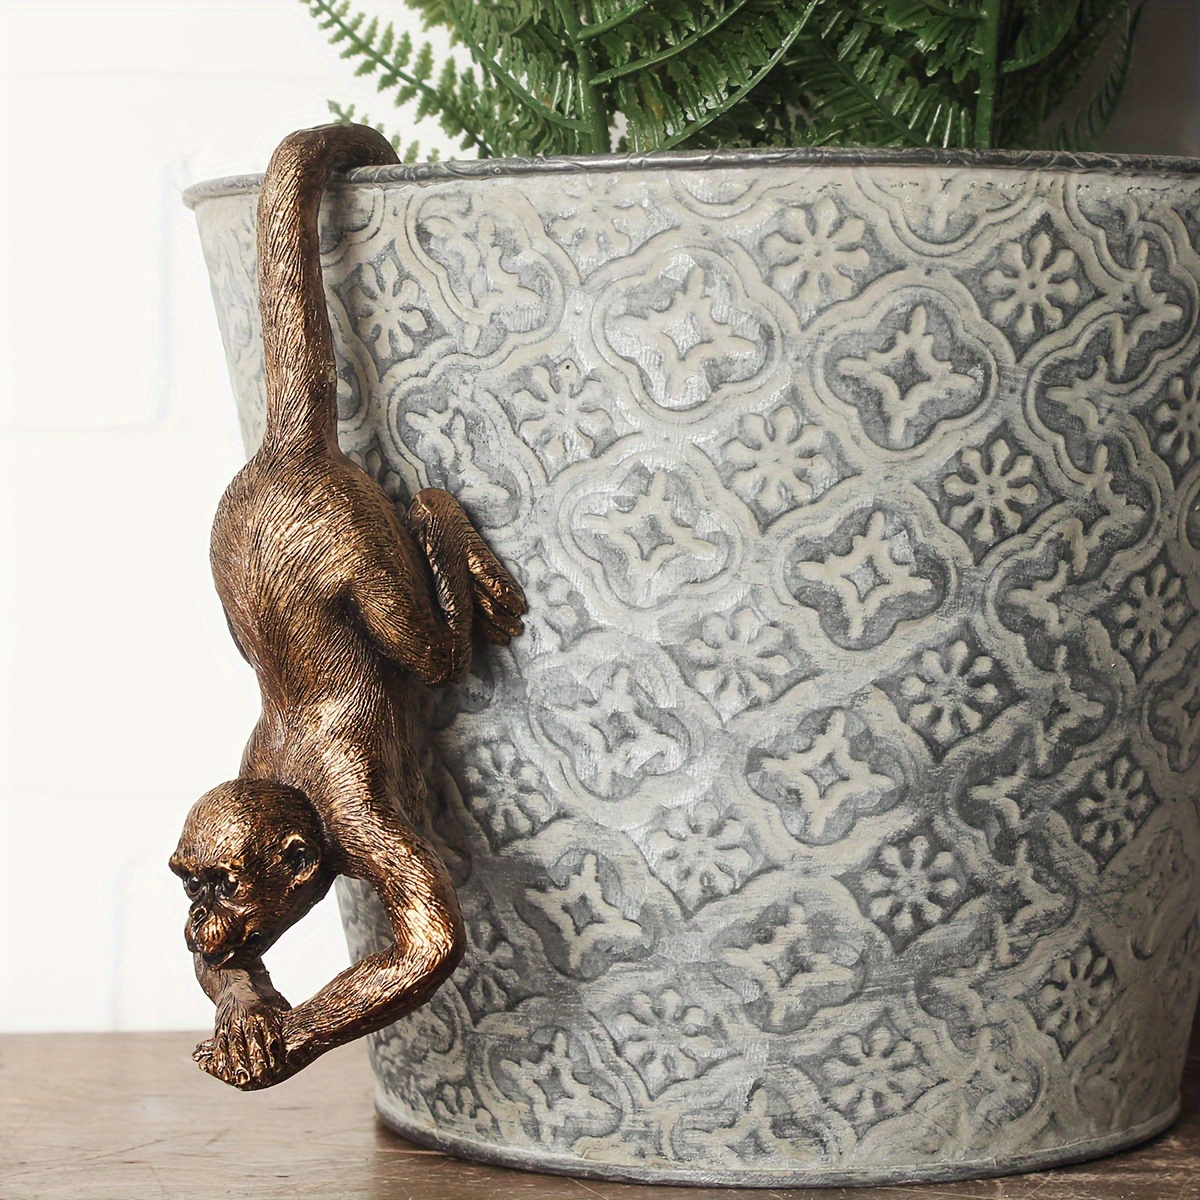 

Charming Faux Copper Monkey Statue - Creative Hanging Planter For Home, Balcony & Garden Decor